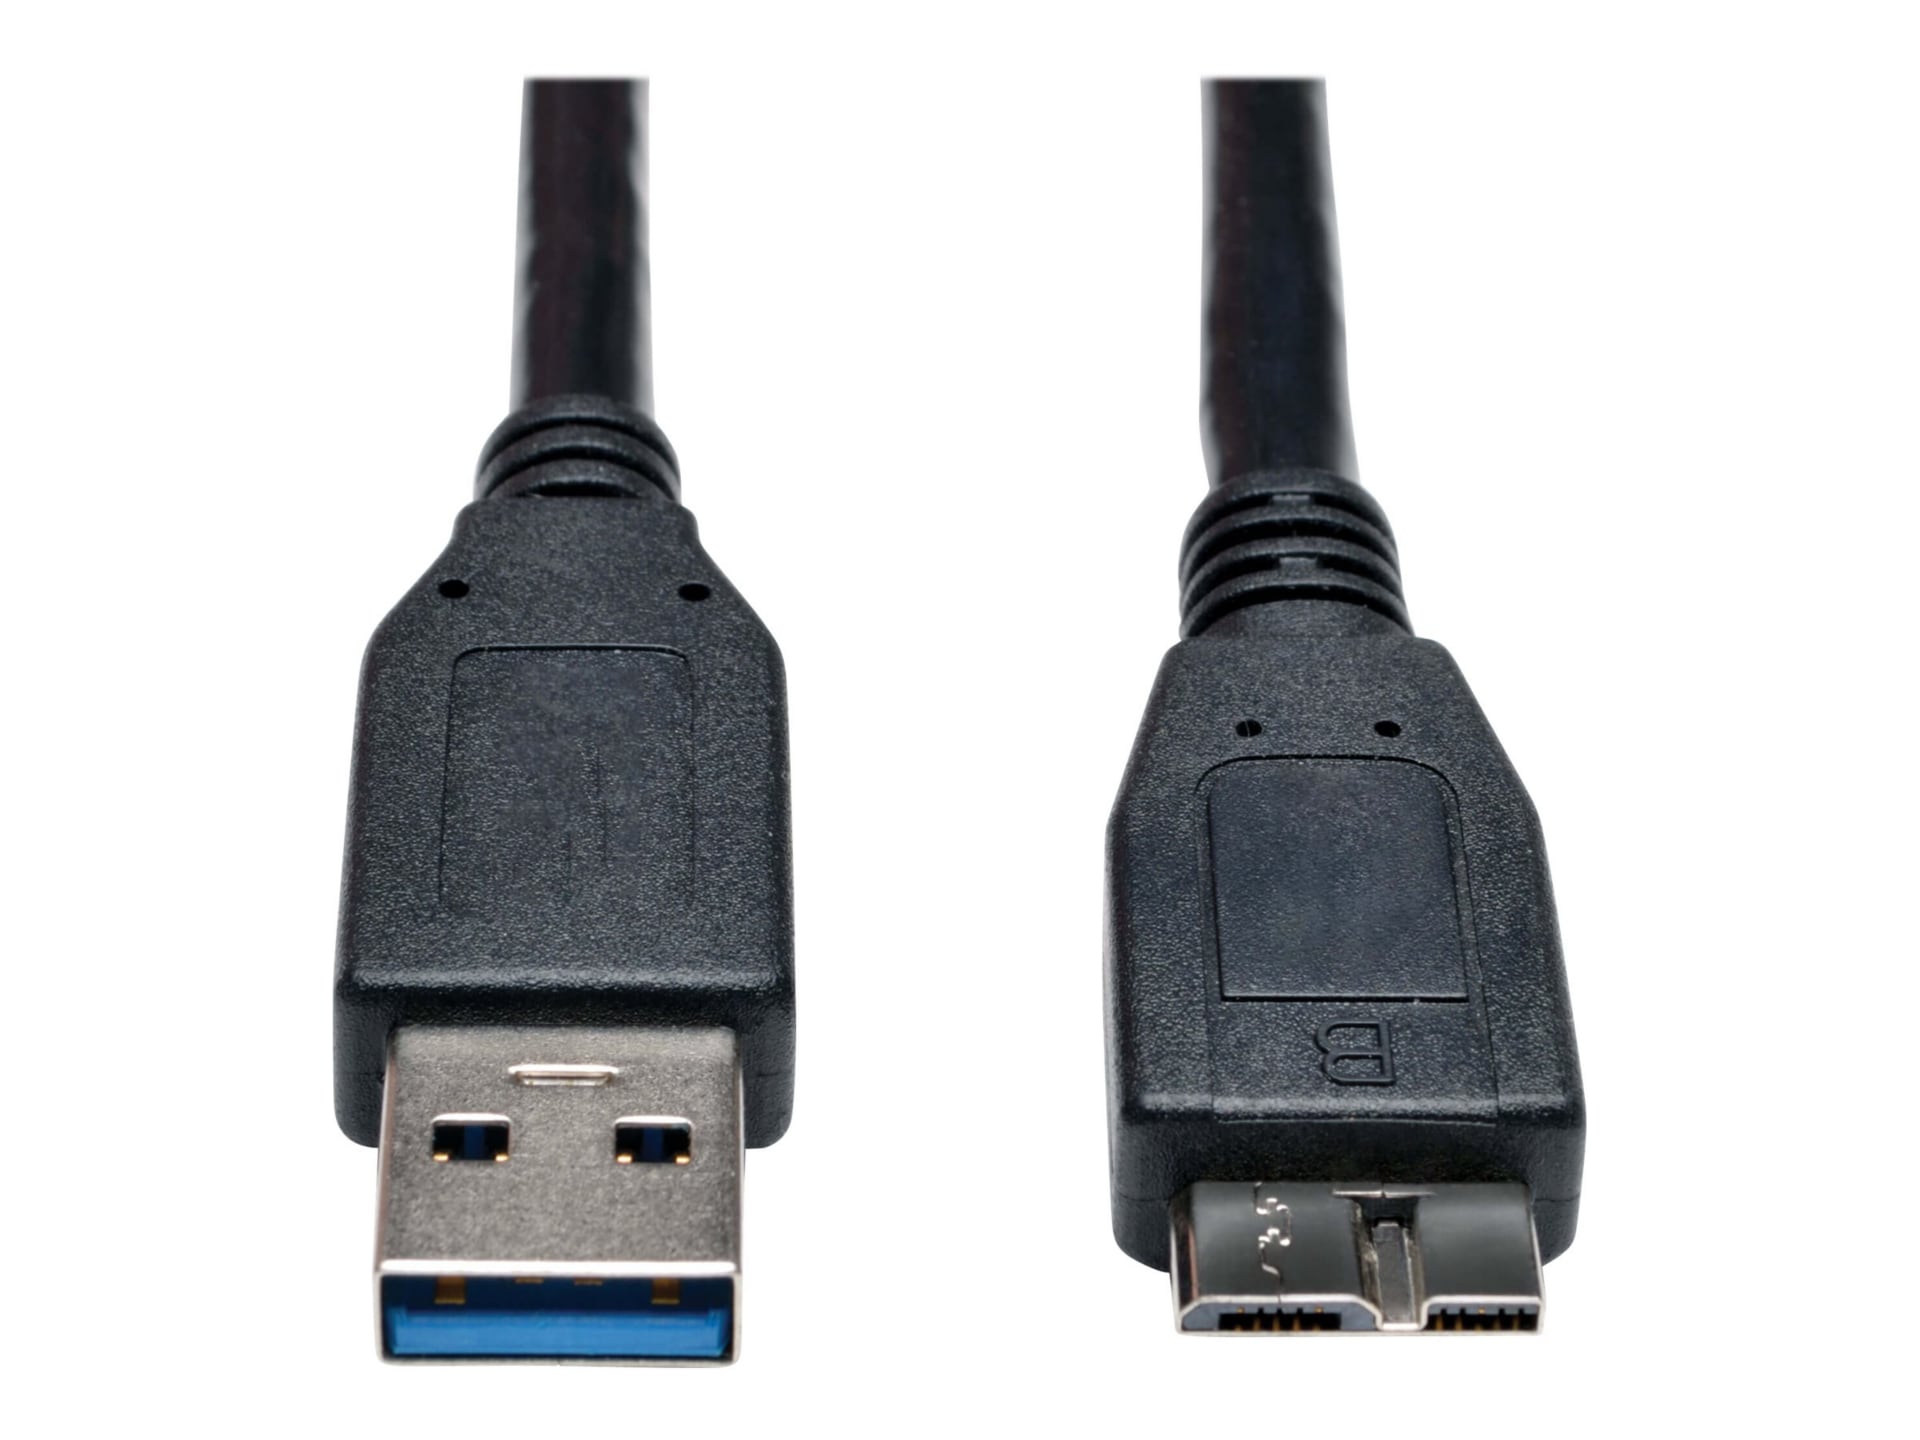 Eaton Tripp Lite Series USB 3.0 SuperSpeed Device Cable (A to Micro-B M/M) Black, 3 ft. (0,91 m) - USB cable - Micro-USB